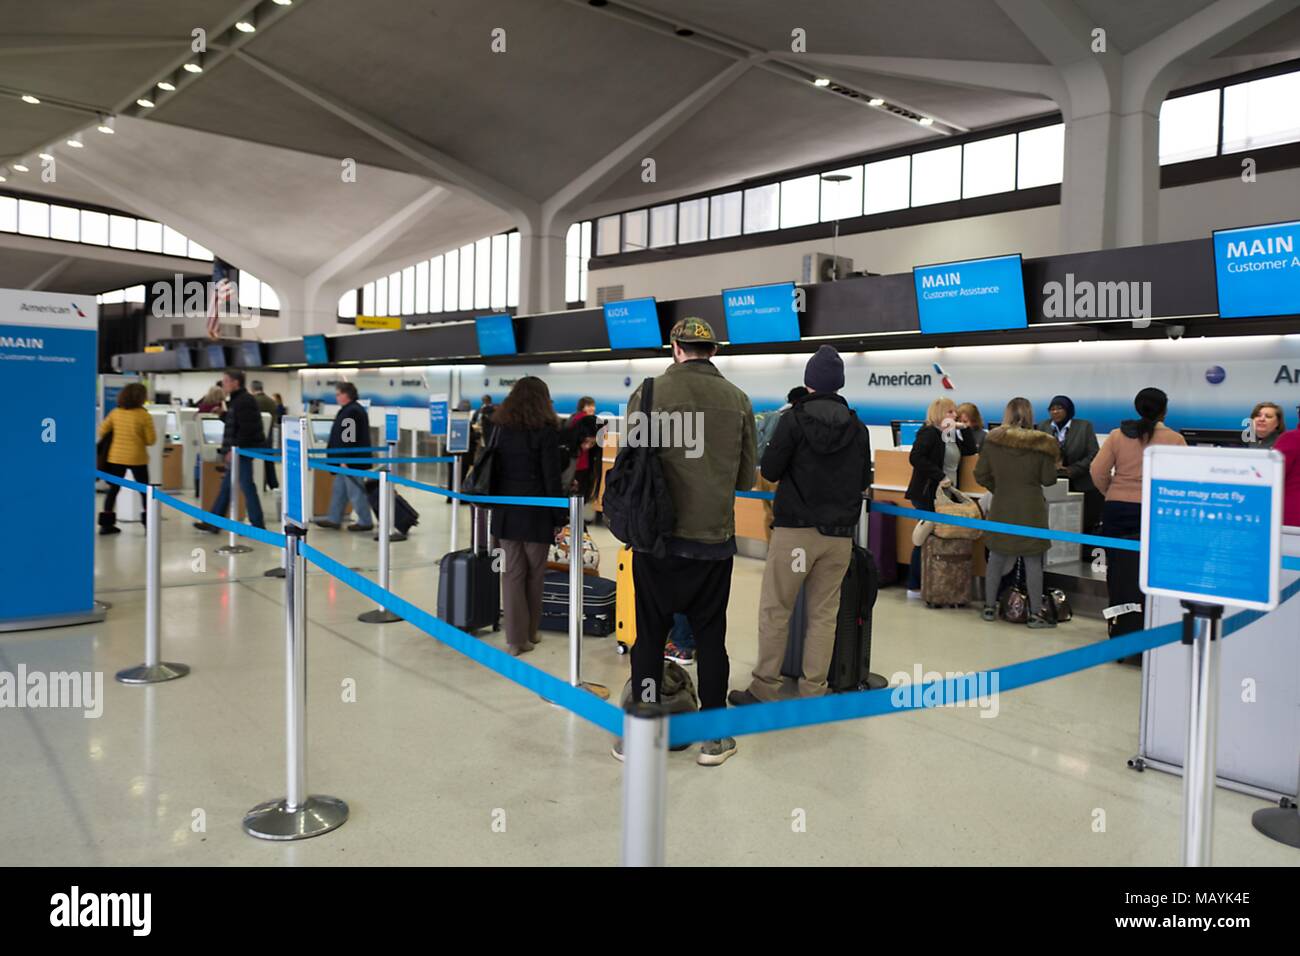 Customers Stand In Line And Prepare To Check In At American